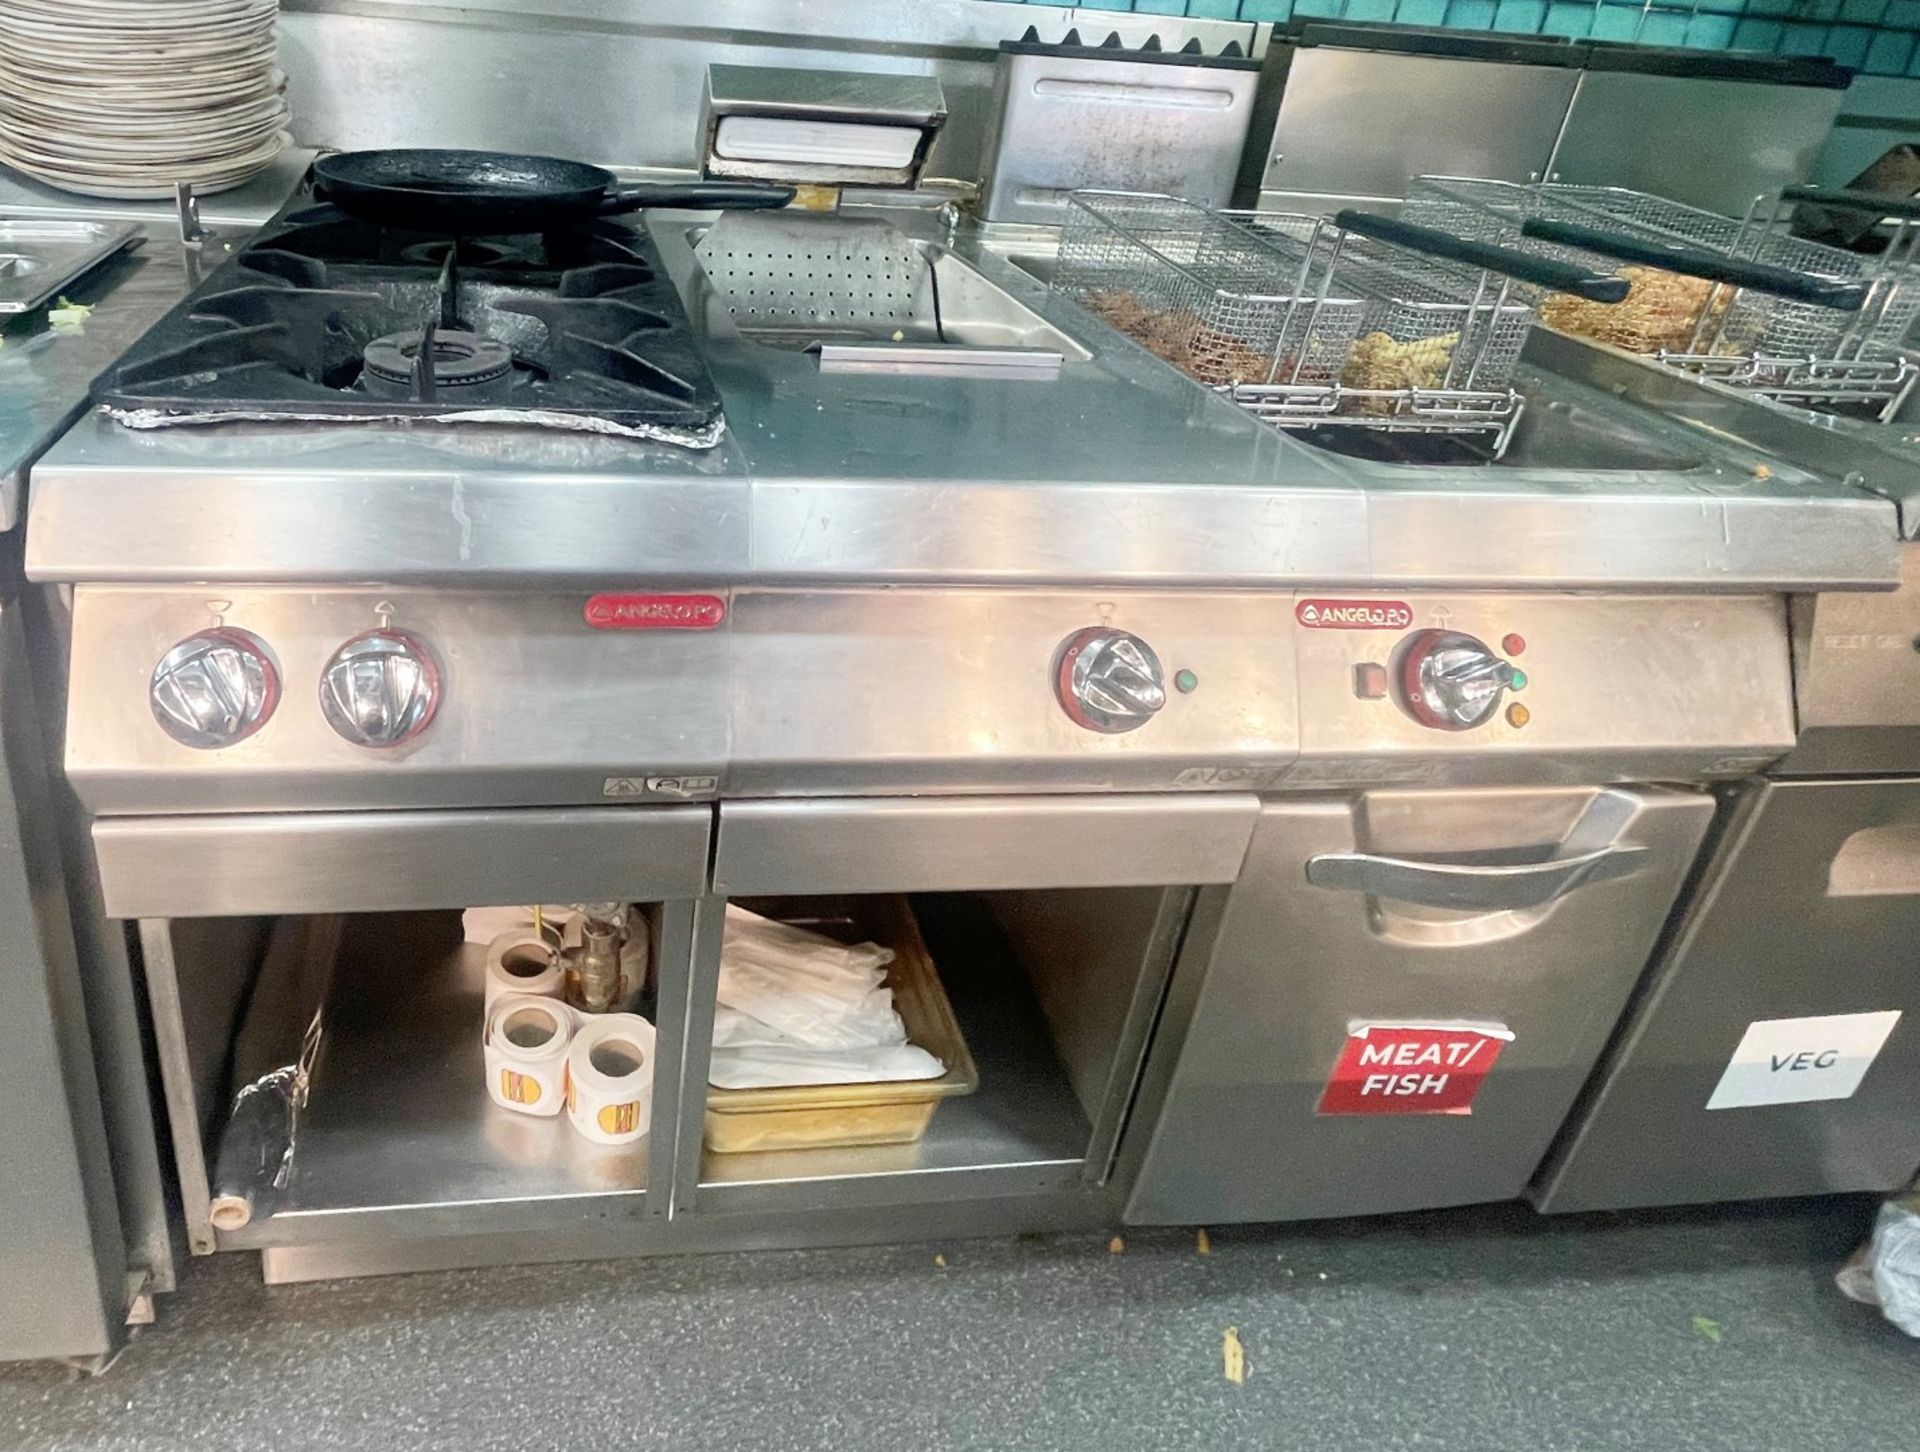 1 x Angelo Po Cook Station Featuring Single Tank Fryer, Two Burner Cooker and Chip Scuttle - Image 3 of 8